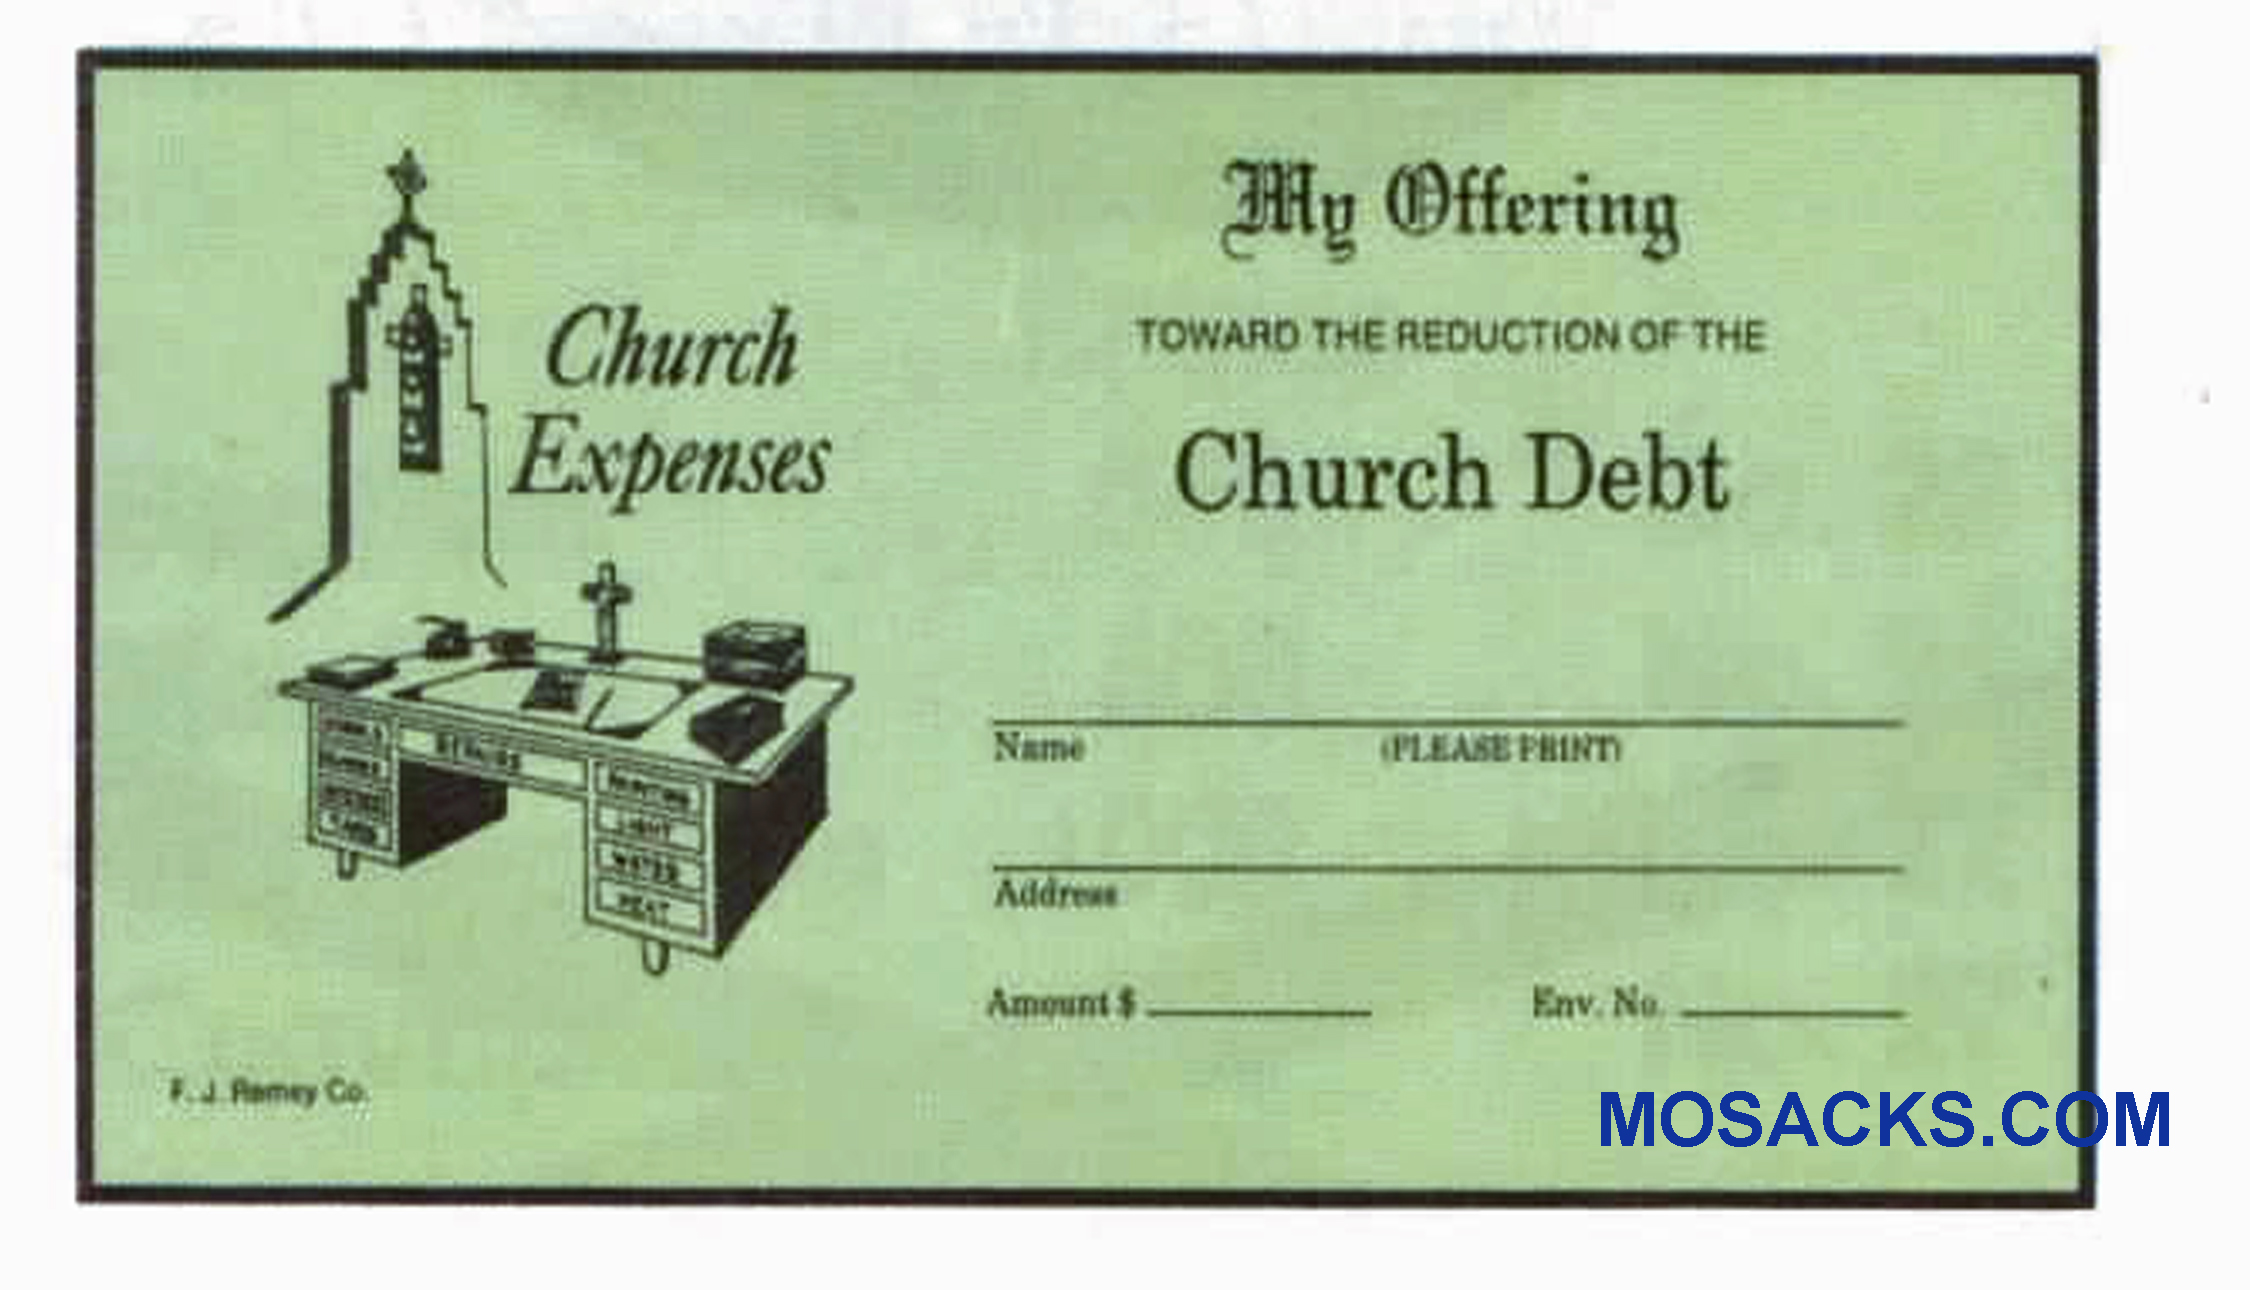 My Offering Toward Reduction of the Church Debt - Church Offering Envelope 6-1/4 x 3-1/8 #304-342